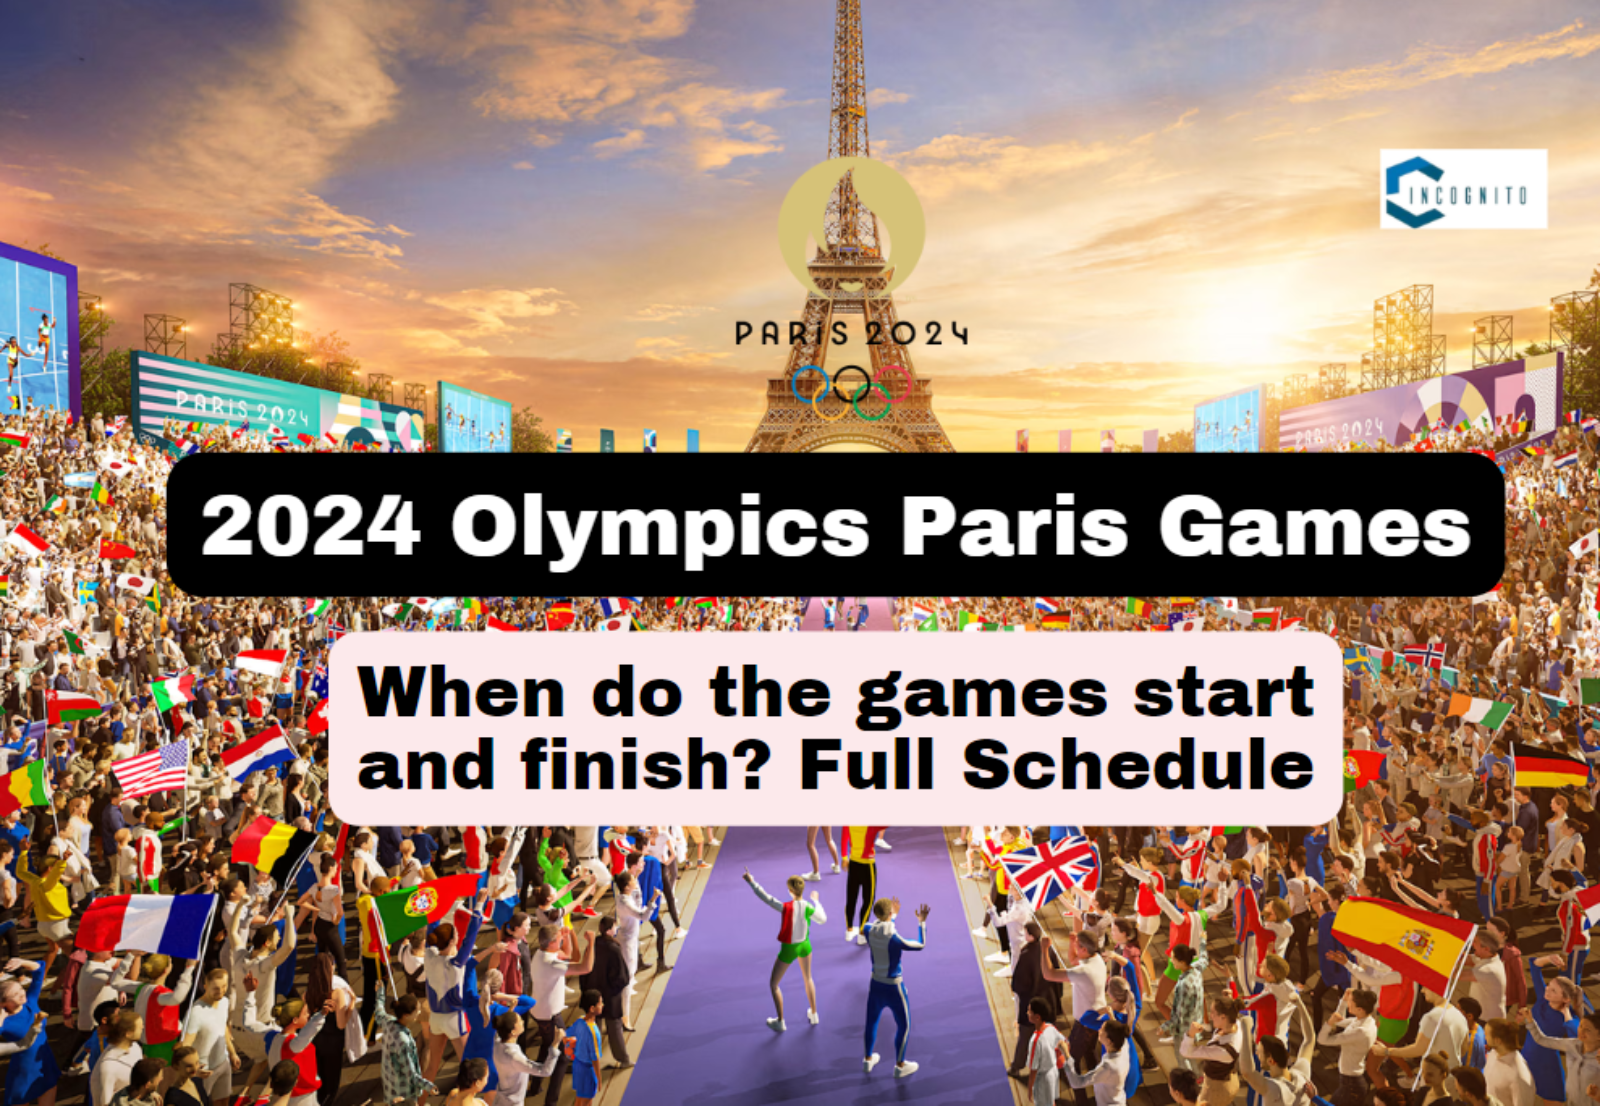 2024 Olympics Paris Games: When do the games start and finish? Full Schedule